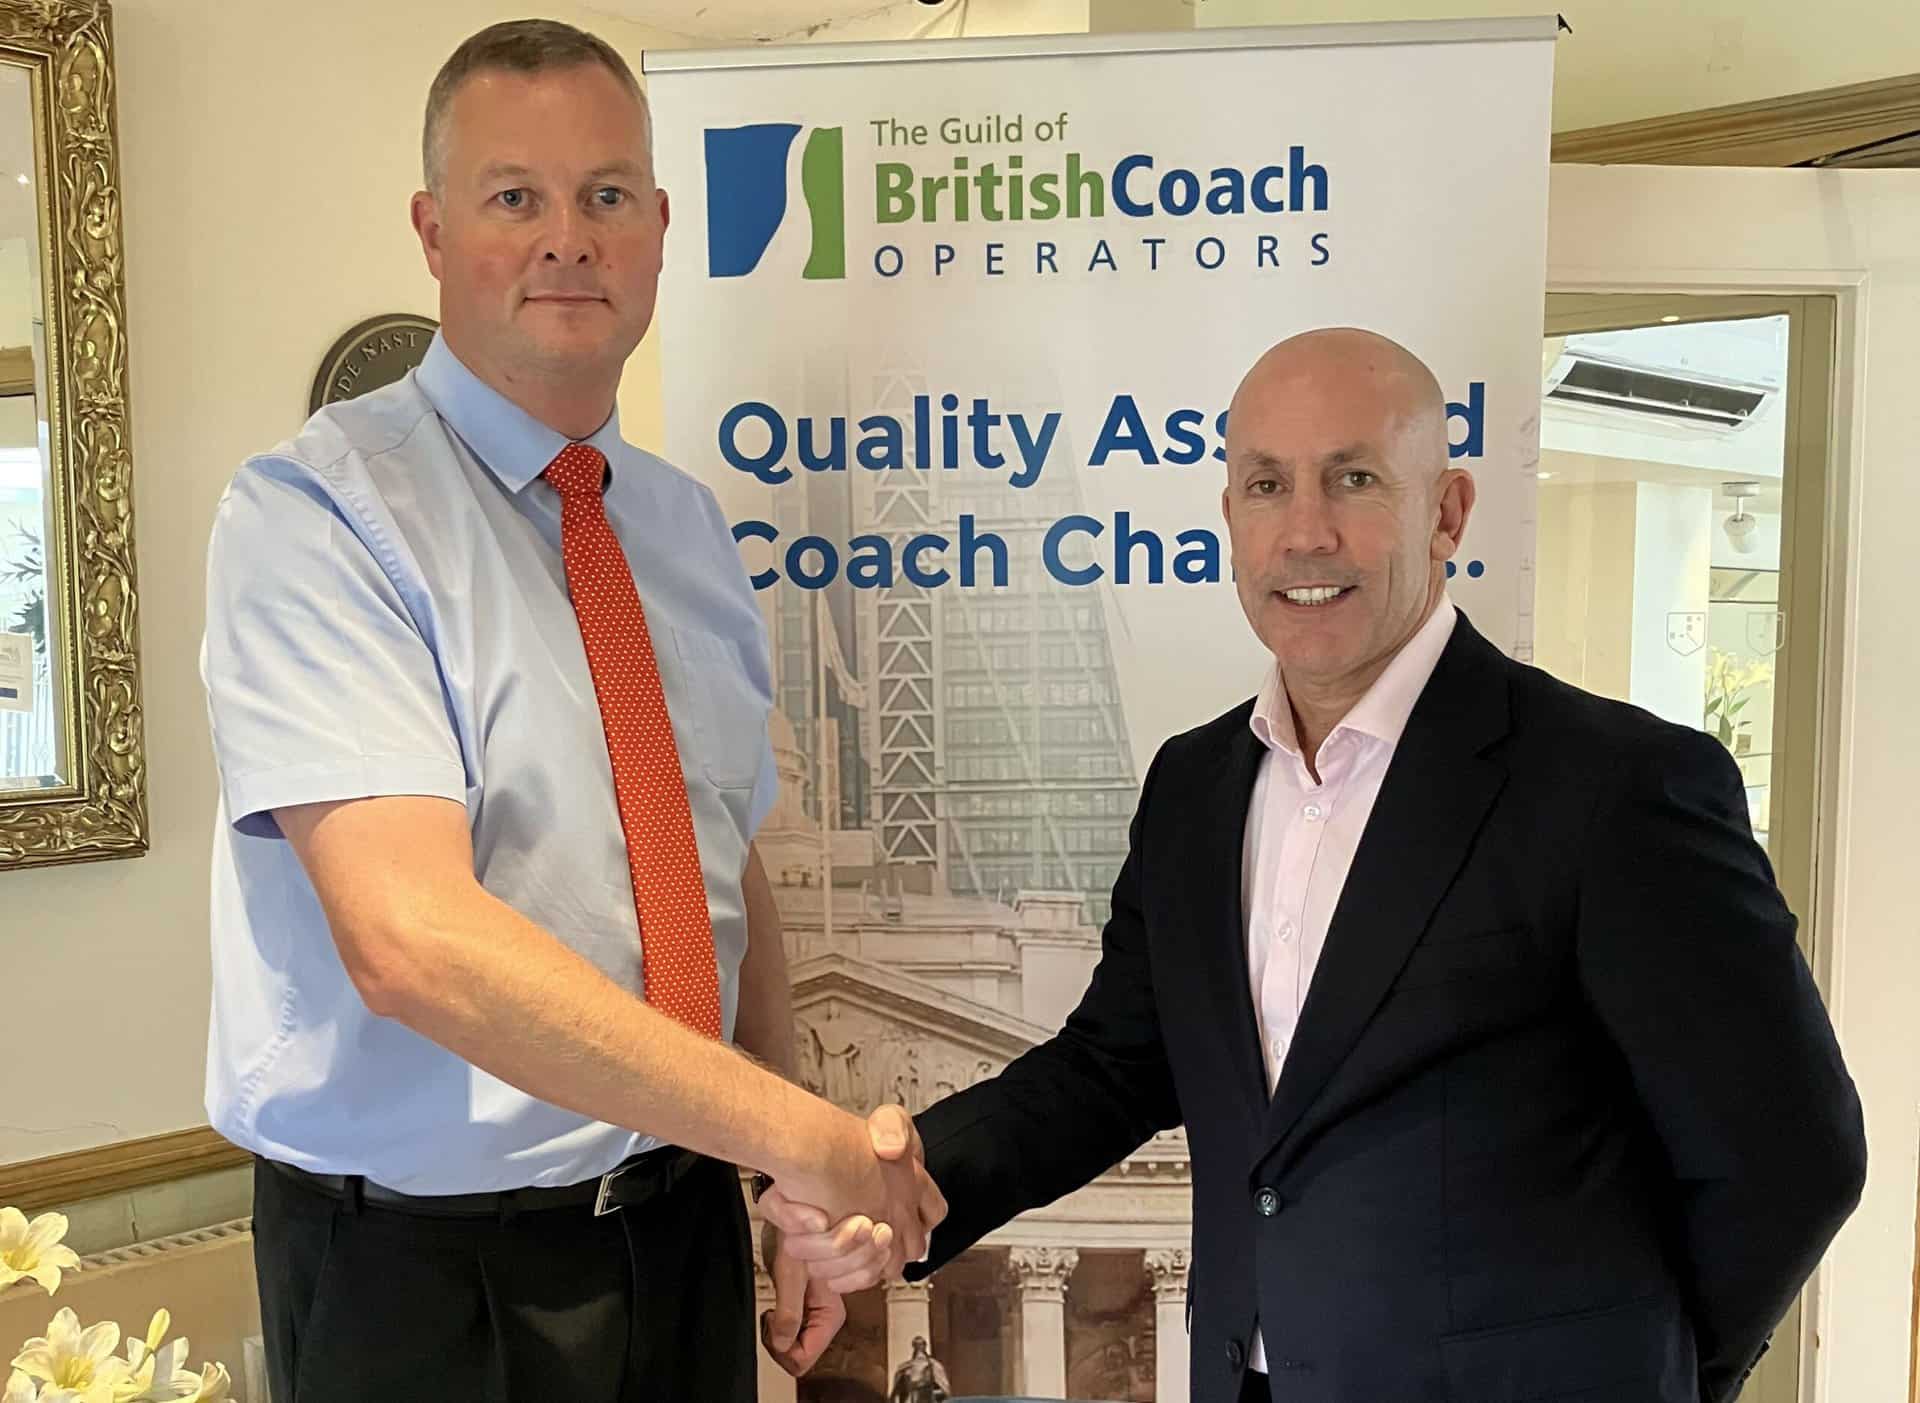 phil hitchen of belle vue manchester, right, with anthony winson, chairman of the guild of british coach operators landscape